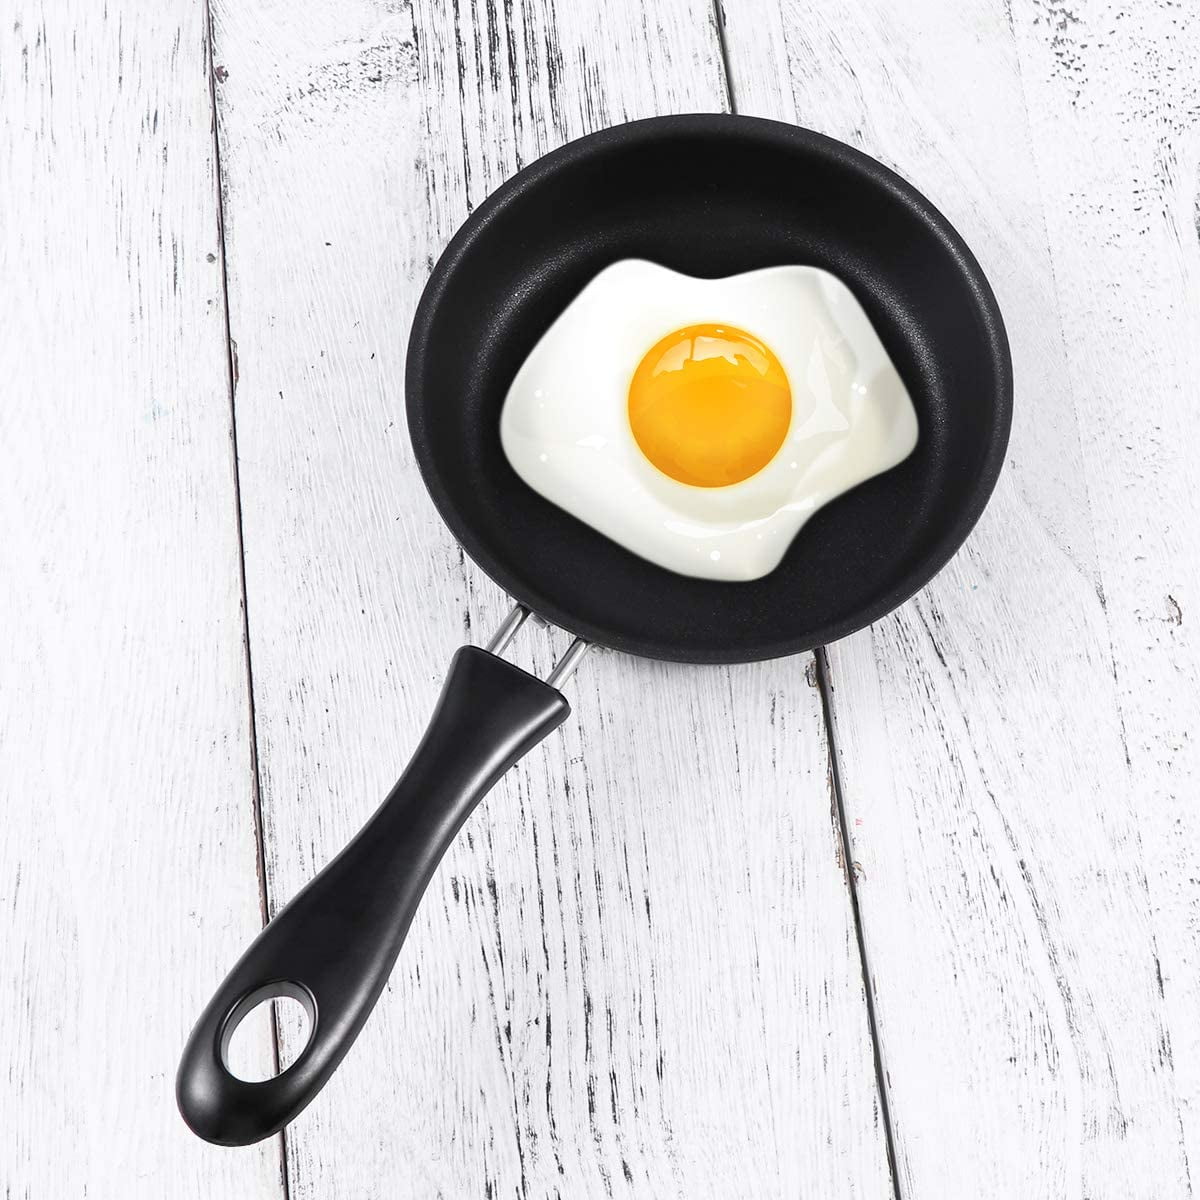 WALFRONT Portable Mini Frying Pan Poached Egg Household Small Kitchen Cooker